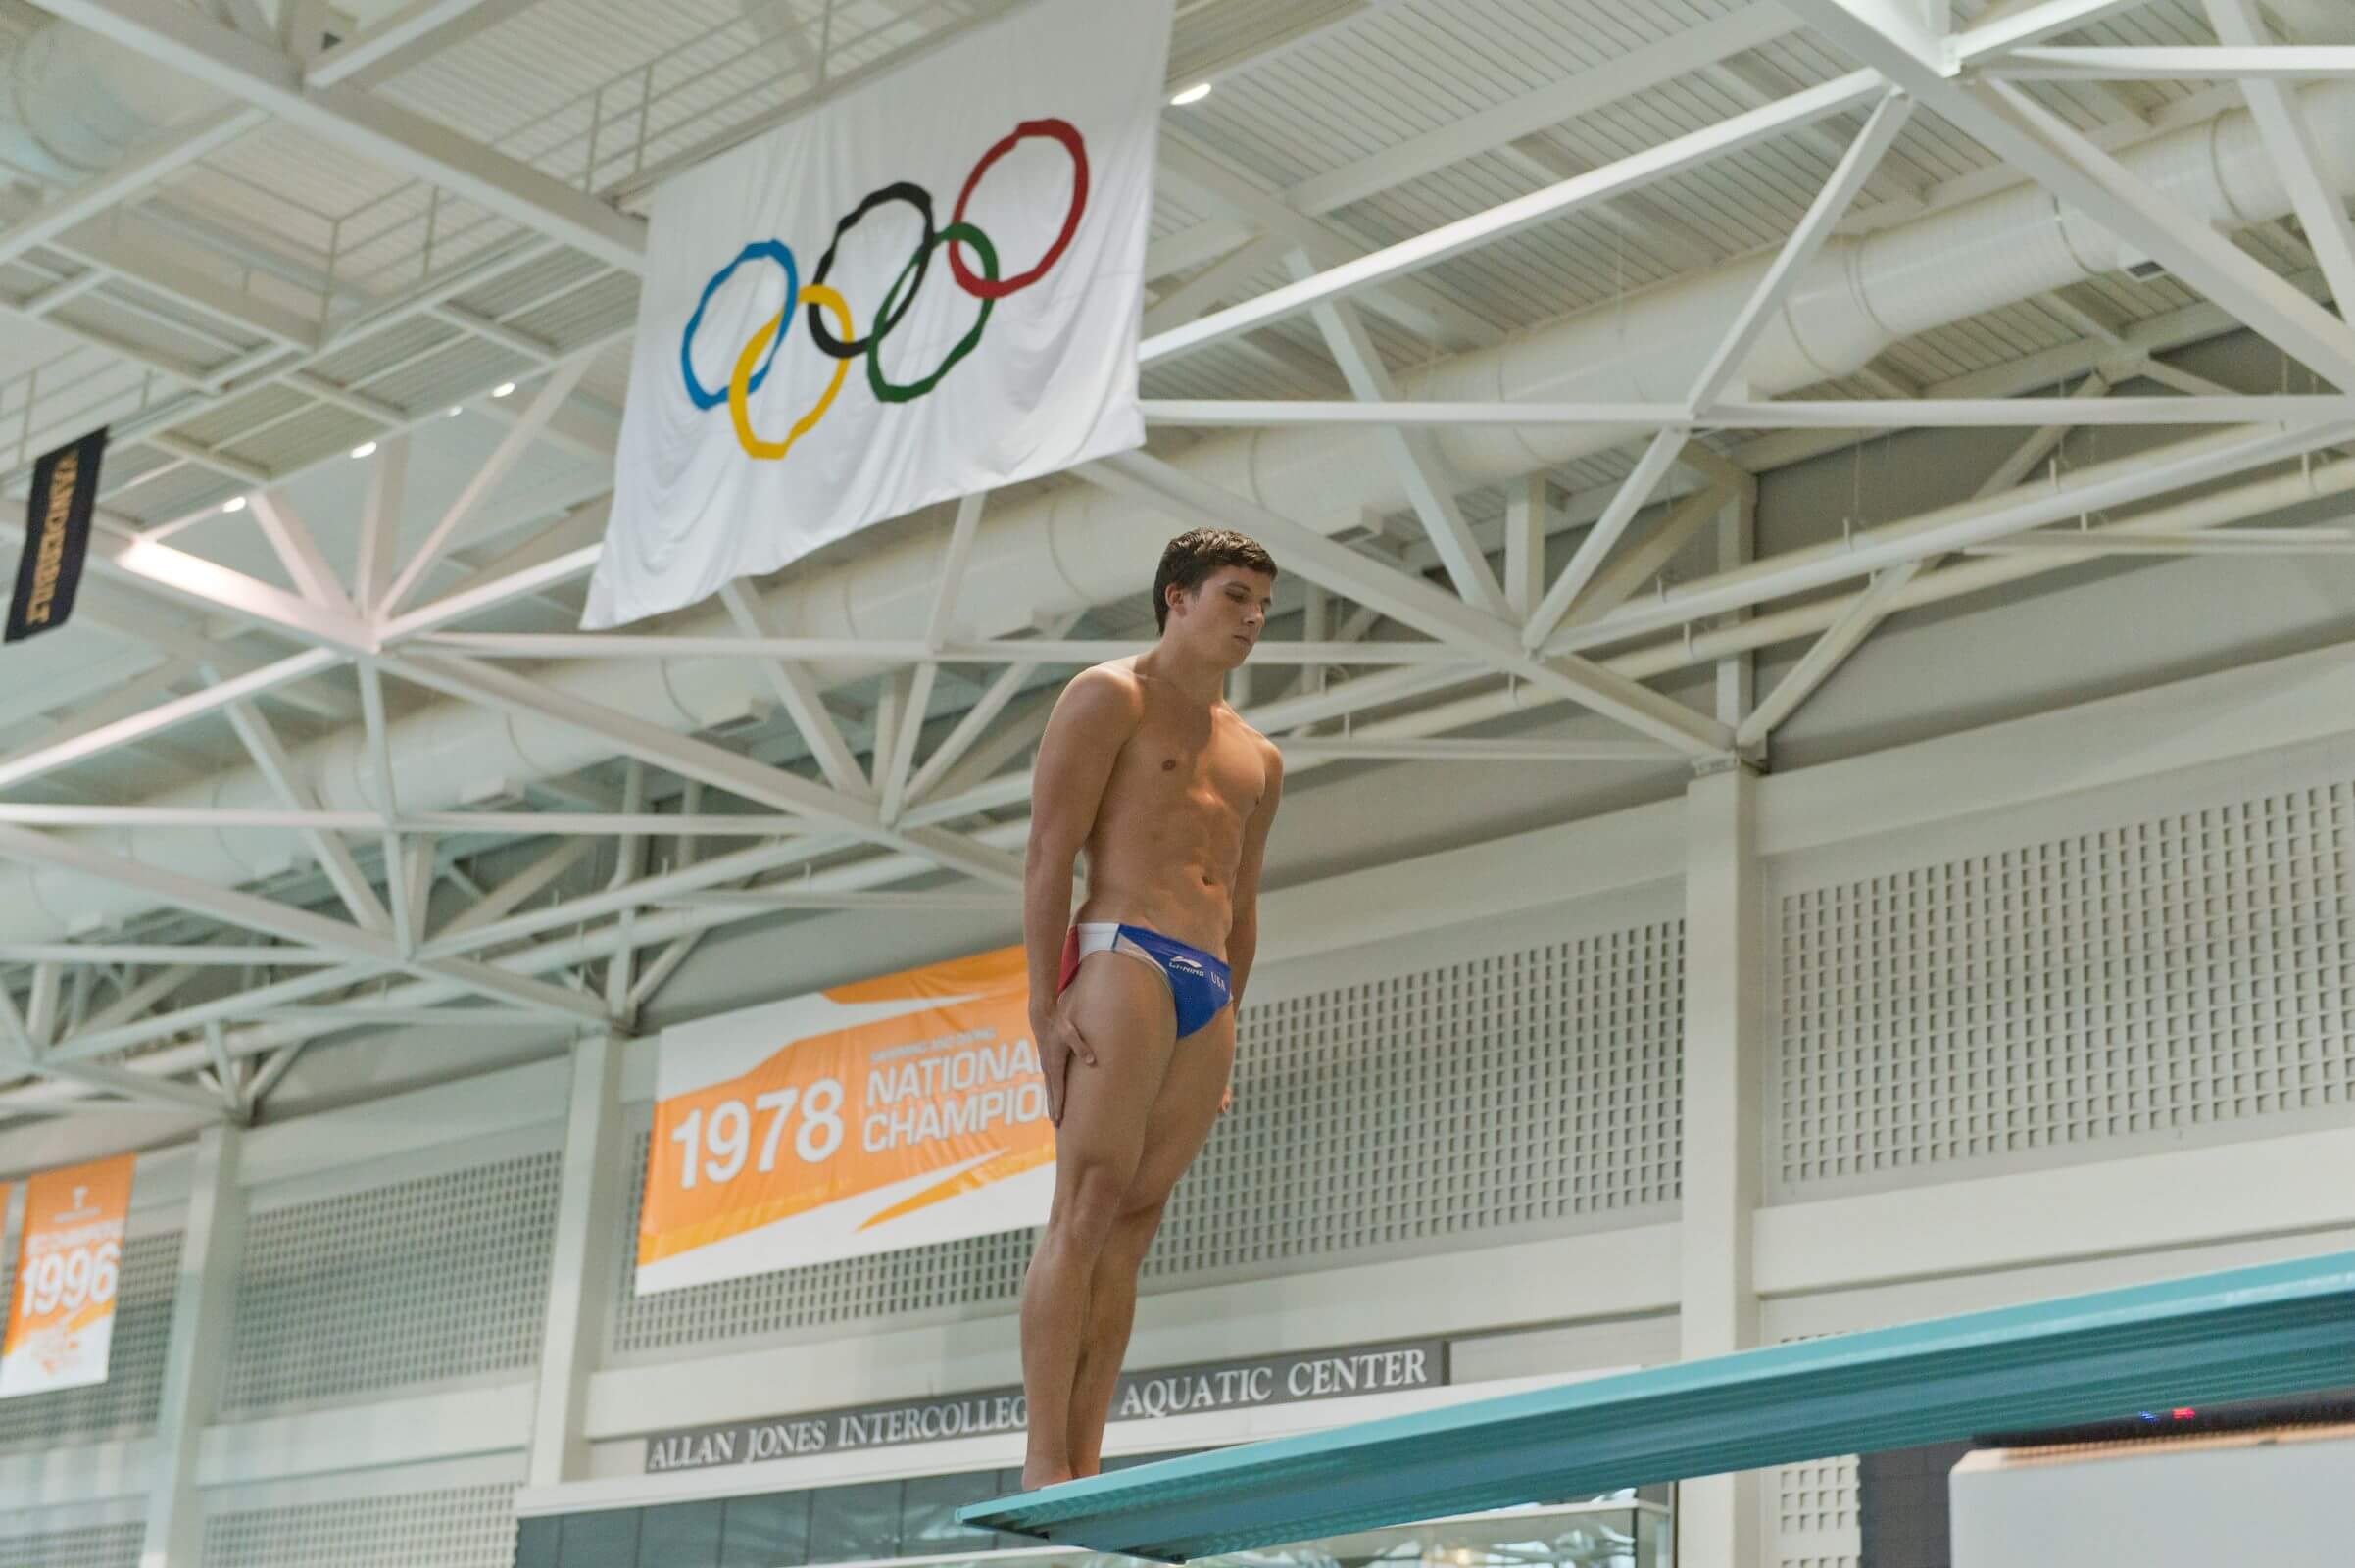 Knoxville to Host 2024 U.S. Olympic Diving Team Trials